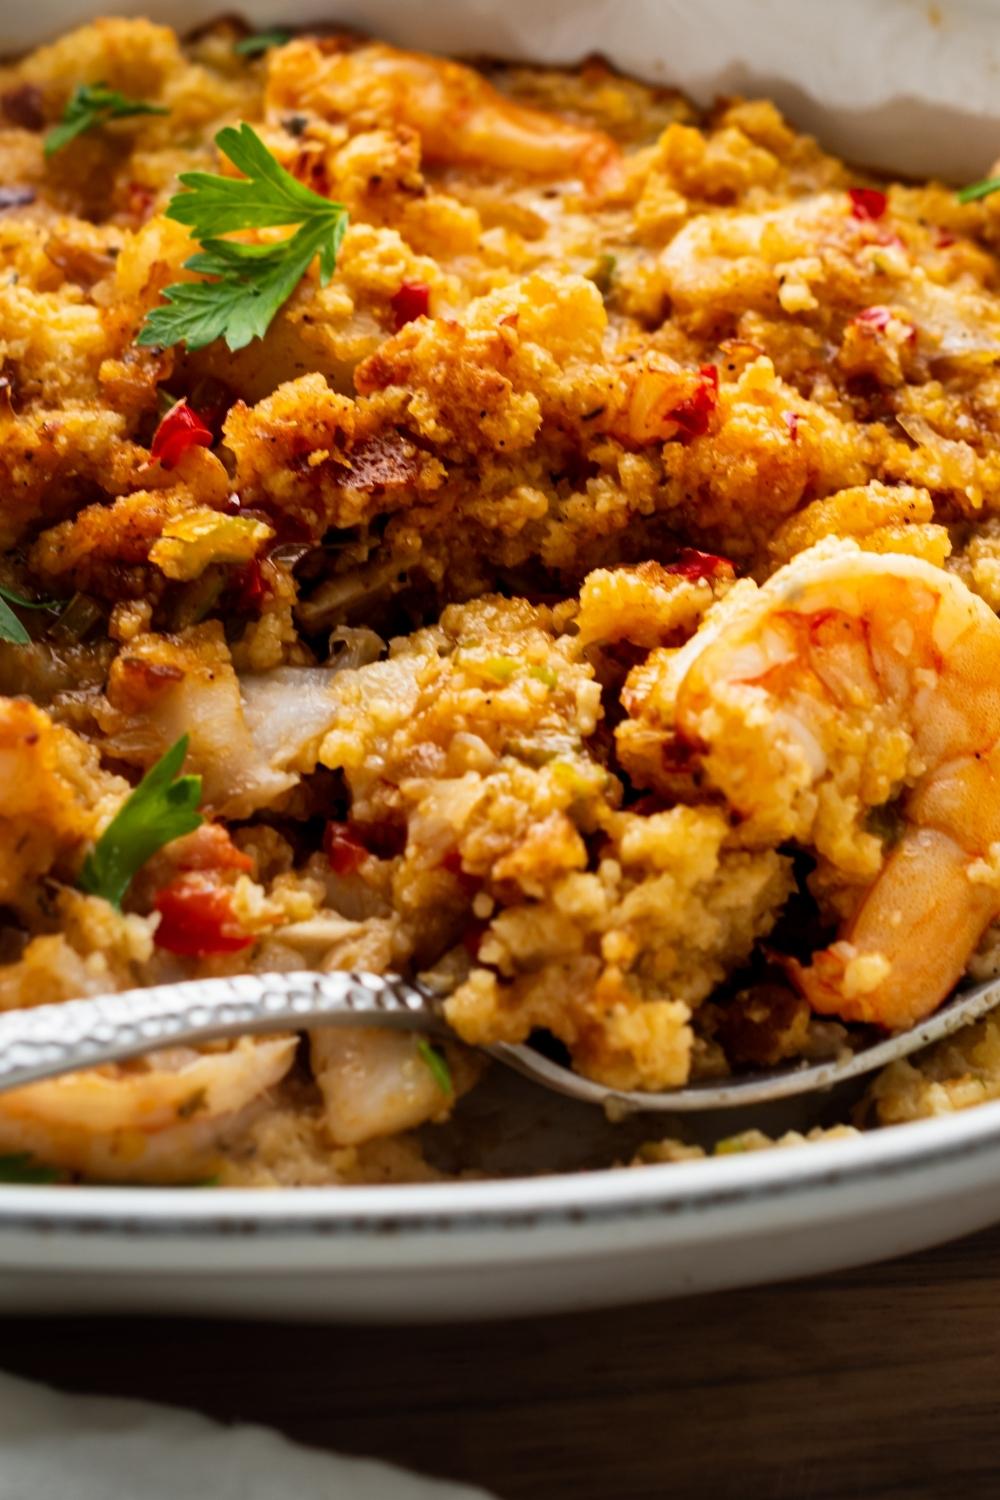 A close-up of a serving dish with cooked homemade seafood stuffing. A spoon has taken a scoop with a shrimp in it.